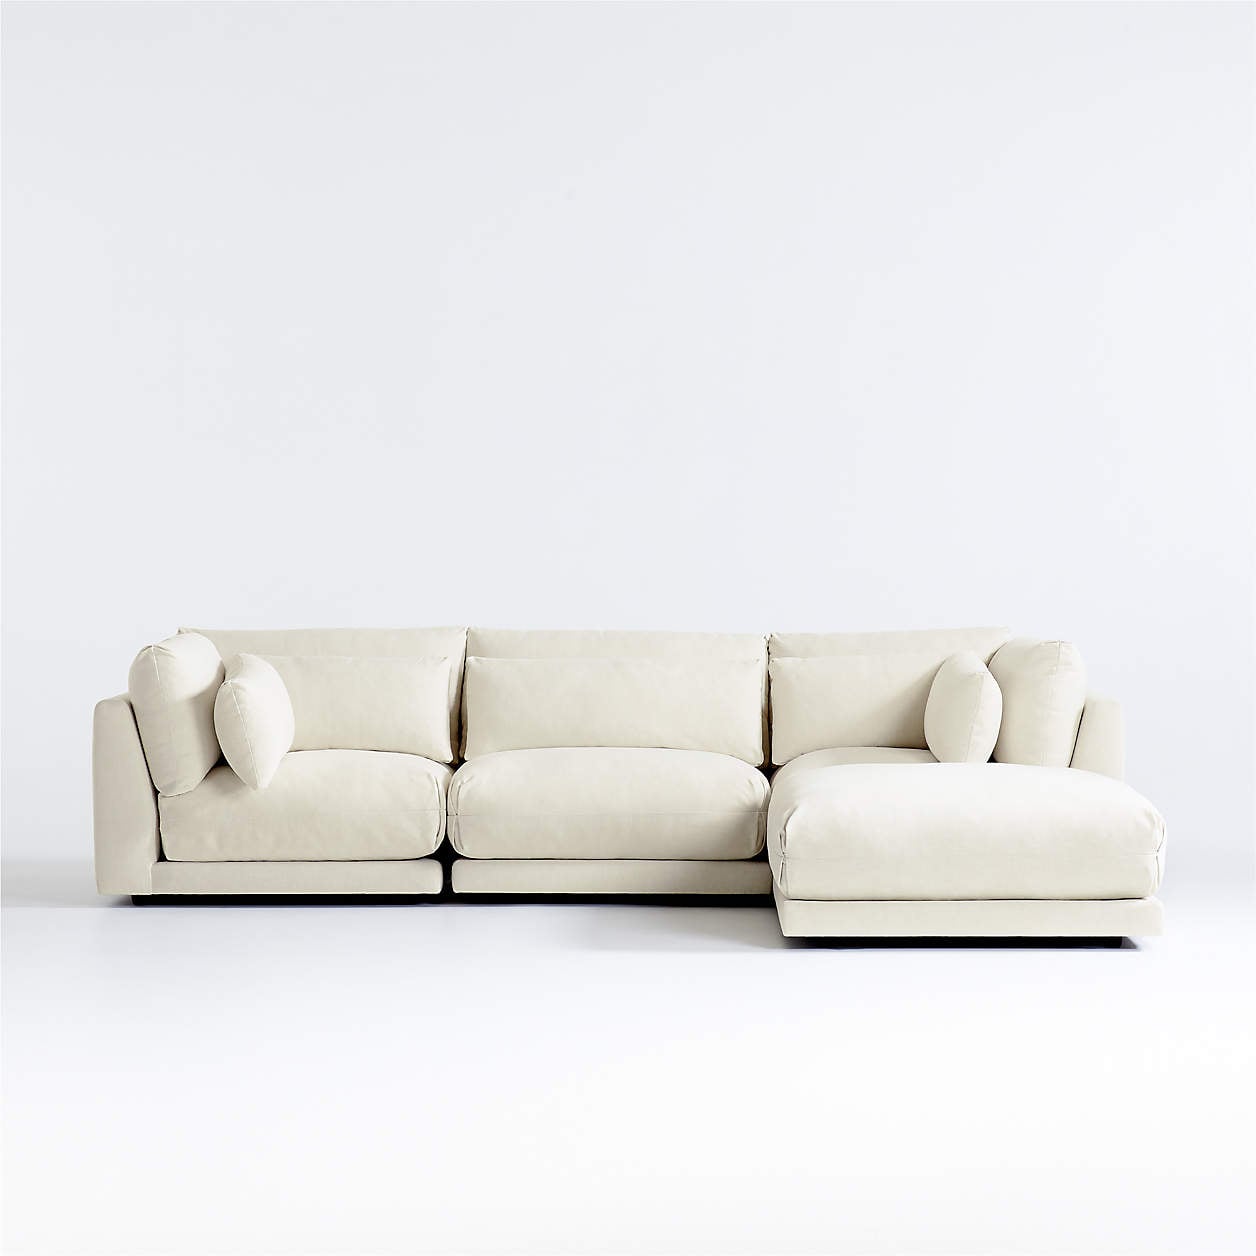 Dupes for this crate and barrel couch? : r/interiordecorating